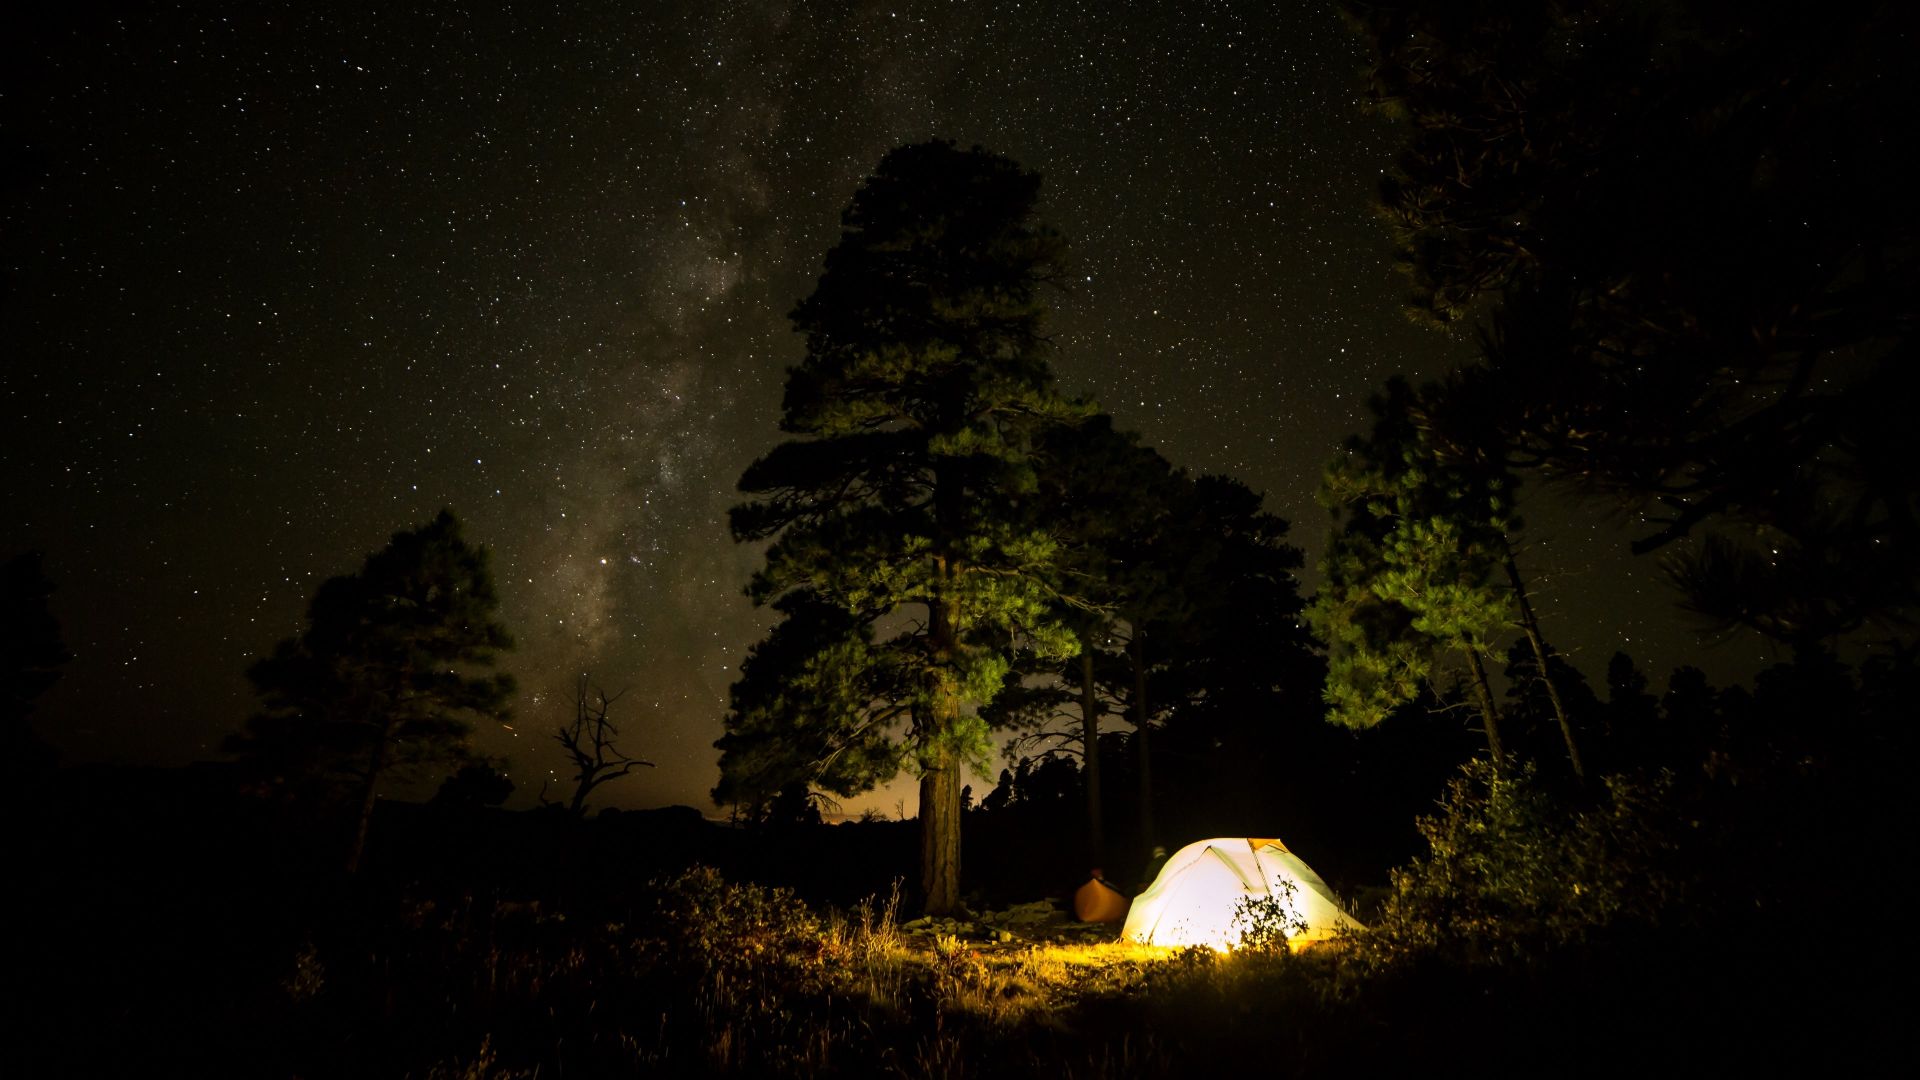 Wallpaper Camping with tent under night sky